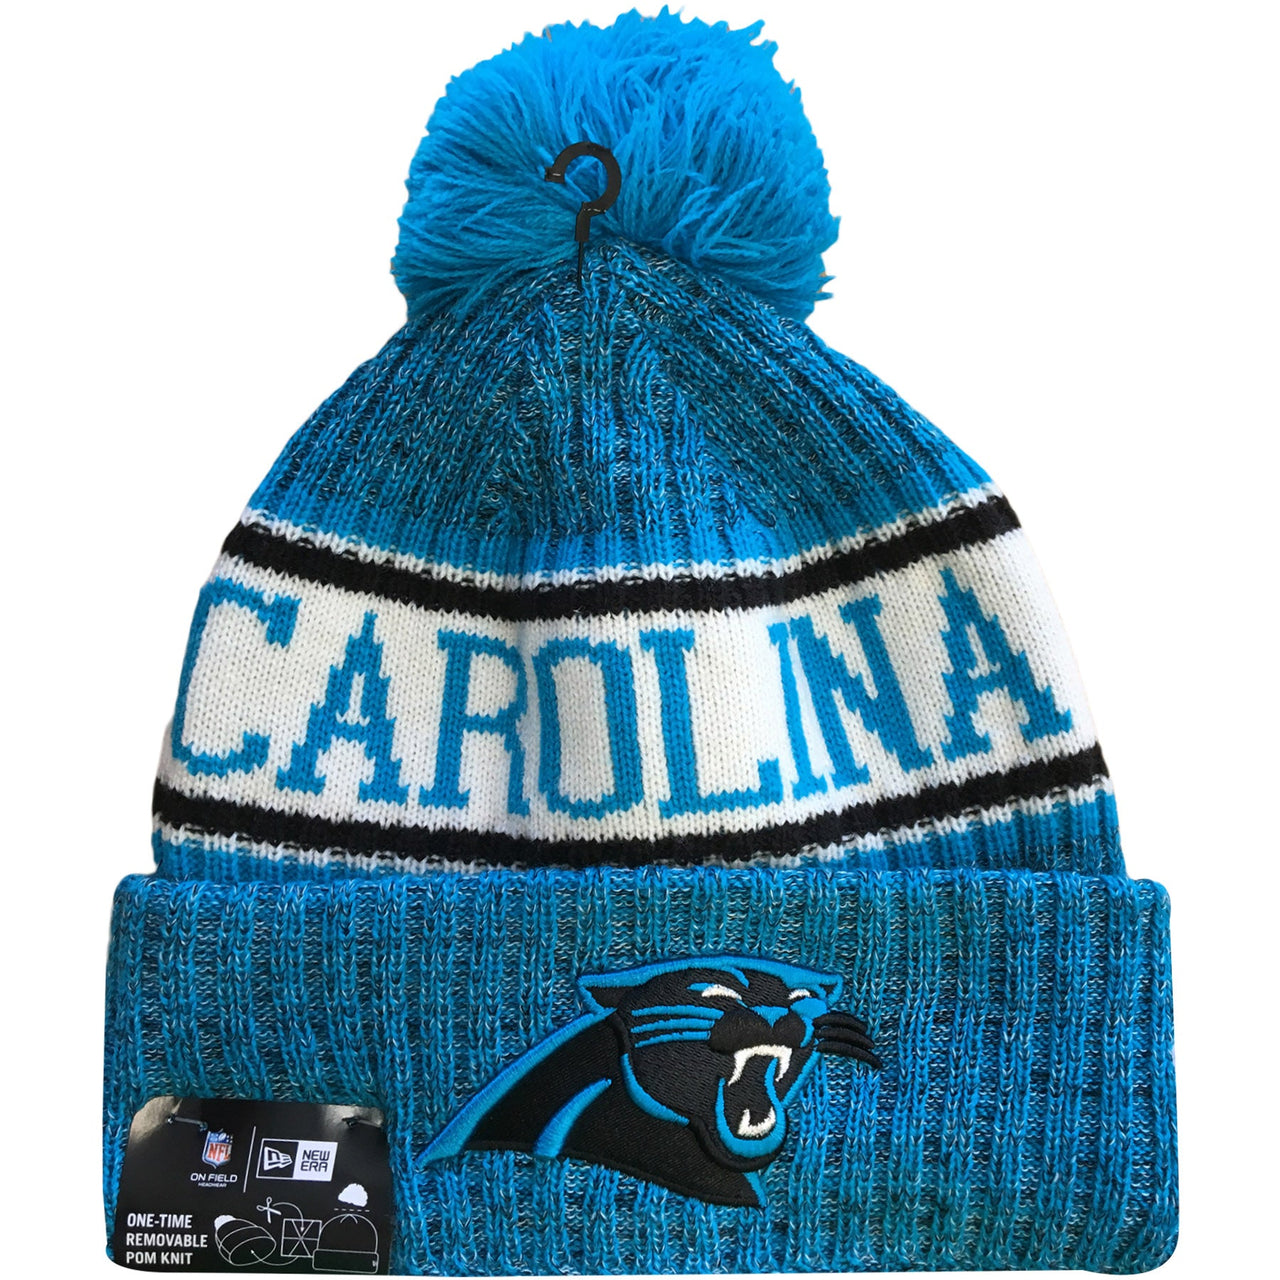 Embroidered on the front of the Carolina Panthers 2018 On Field Cold Weather Sideline Beanie is the Carolina Panthers logo embroidered in black and carolina blue